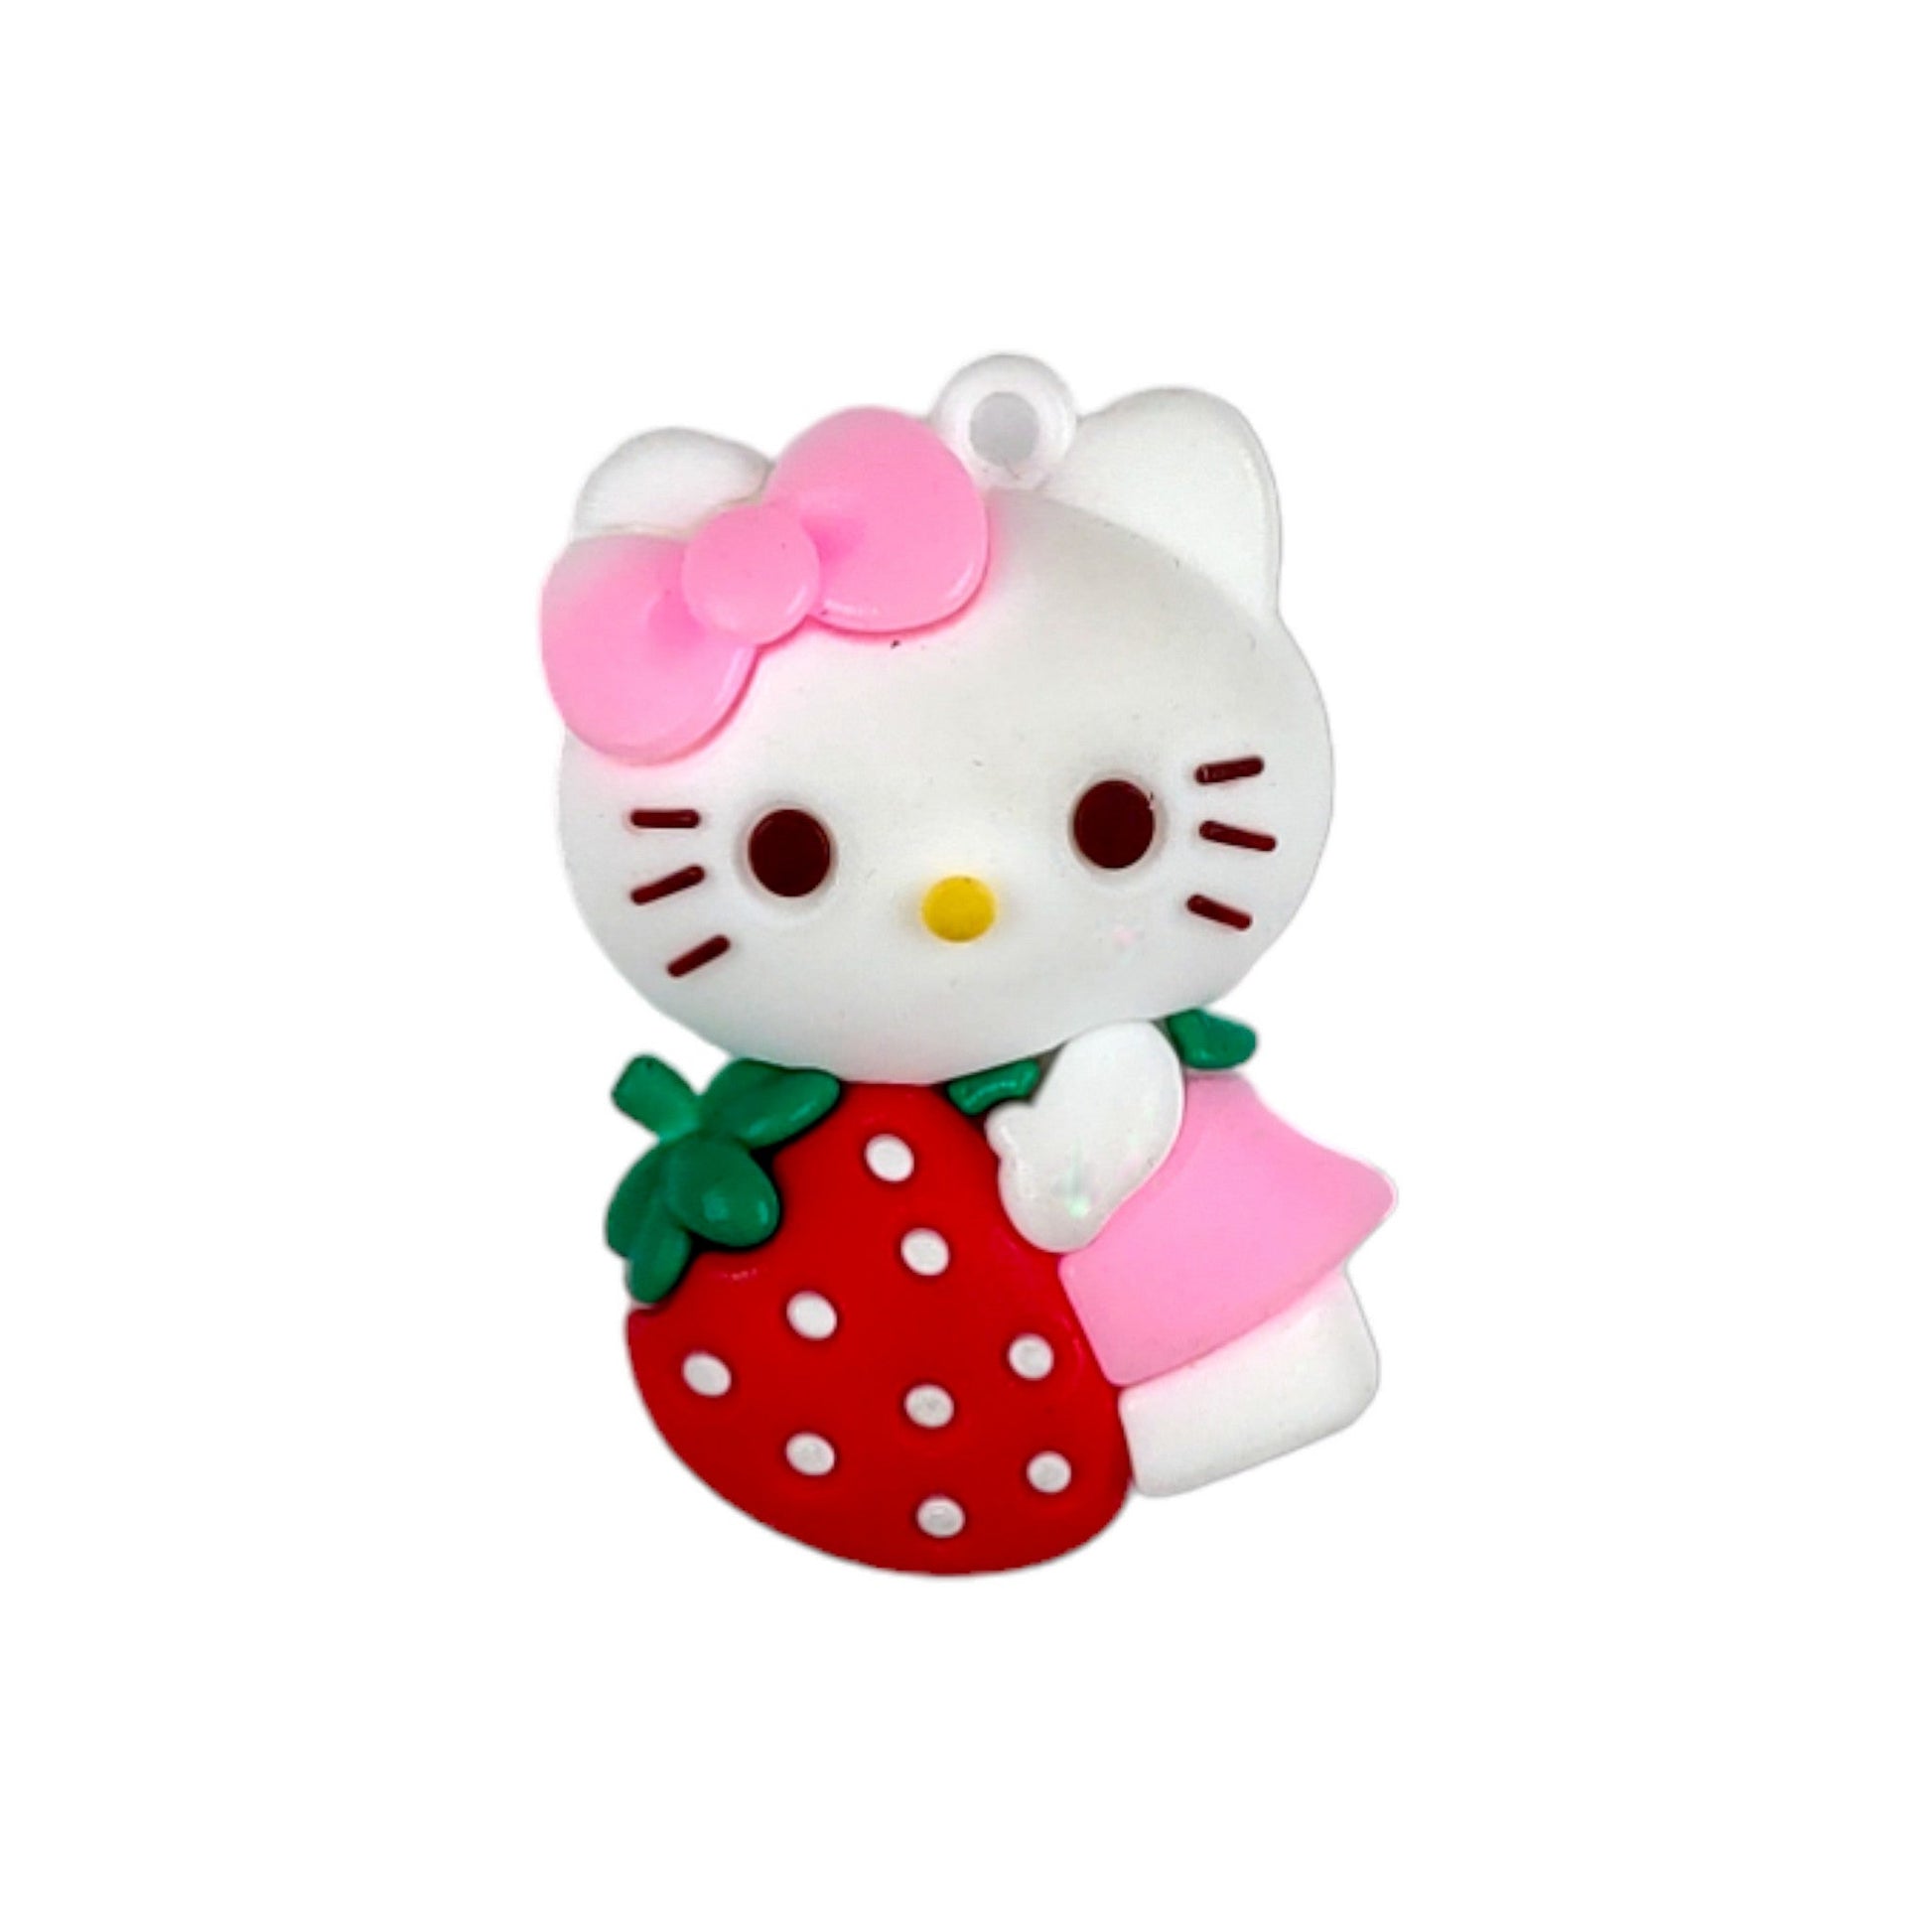 Indian Petals Cute Kity Cat Doll Resin Motif For Craft Design Or Decoration, 25 Pcs,Pink-13524